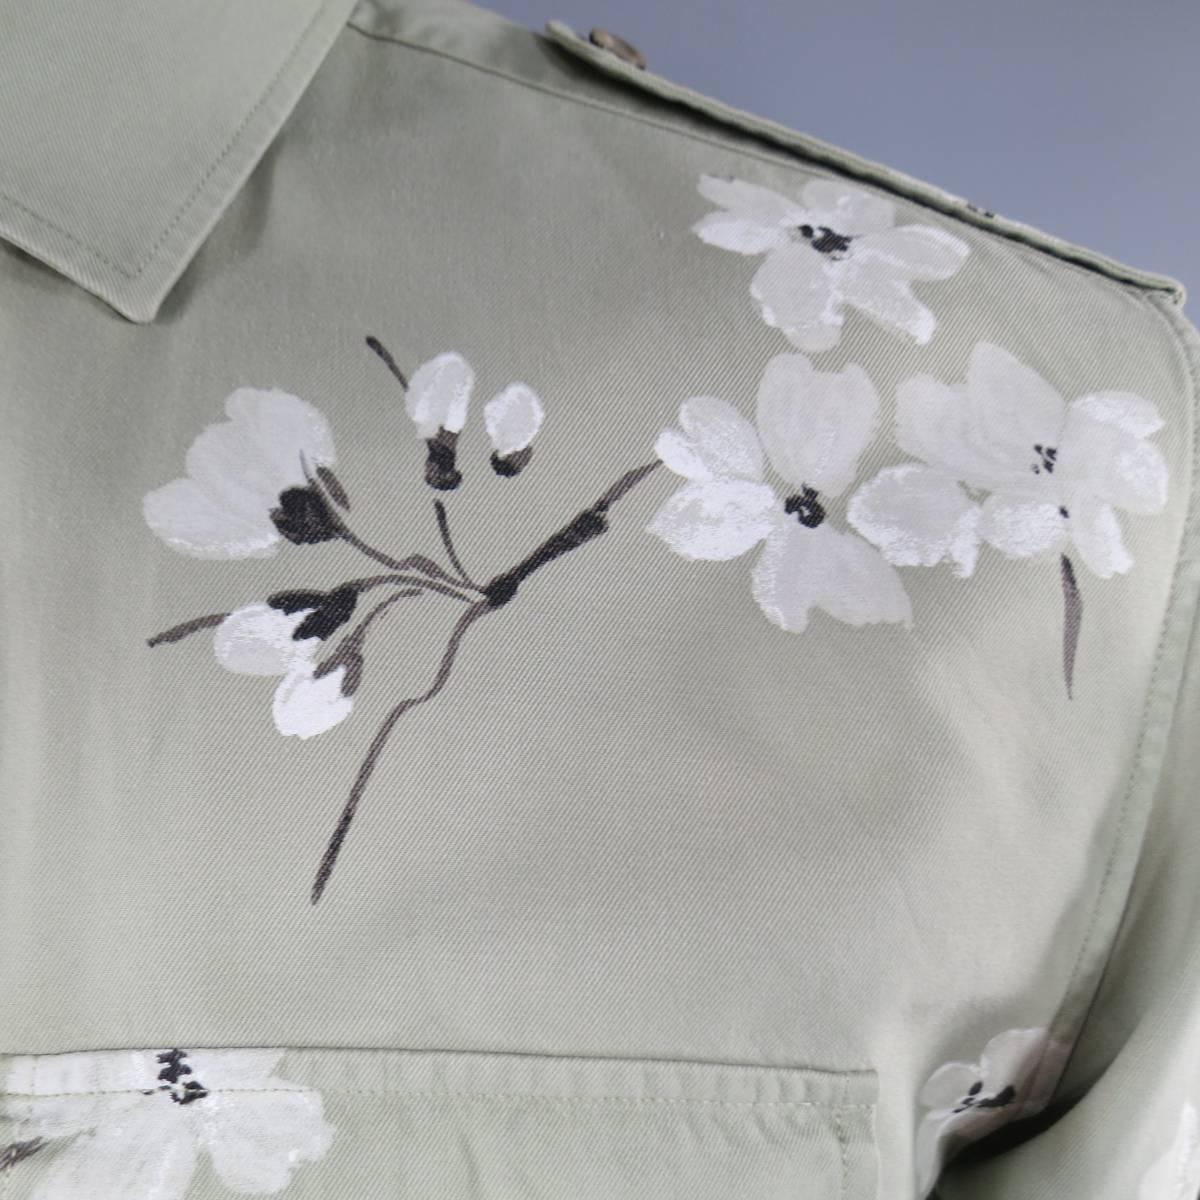 TOM FORD for GUCCI long sleeve button down dress shirt features a minimal collar, two breast pockets, epaulettes and abstract floral cherry blossom design throughout in muted olive.
 
Excellent Pre-Owned Condition
 
 
Measurements:
